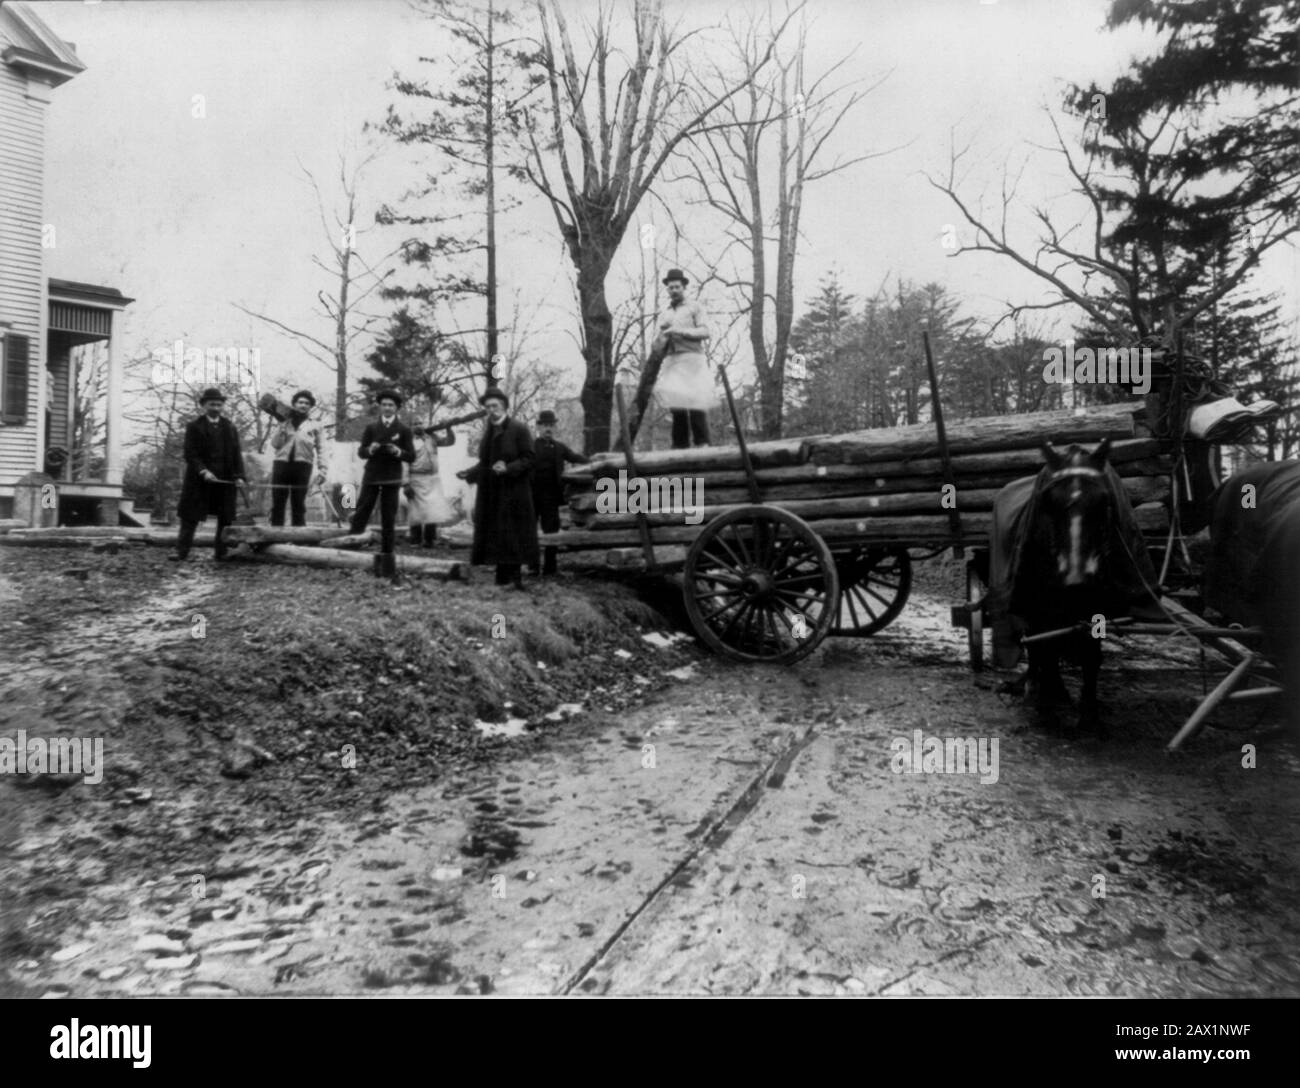 1906 , 21 february , USA :  Men loading logs on a horse-drawn wagon, from the original birthplace of  U.S.A. President ABRAHAM LINCOLN ( 1809 - 1865 ) log cabin at College Point, N.Y., on Feb. 21, 1906, to be re-erected on the Lincoln Farm at Hodgenville, Kentucky, the birthplace of Lincoln -  Presidente della Repubblica - Stati Uniti  - USA  - Abramo - log cabins  - capanna - luogo di nascita - casa natale  ----  Archivio GBB Stock Photo